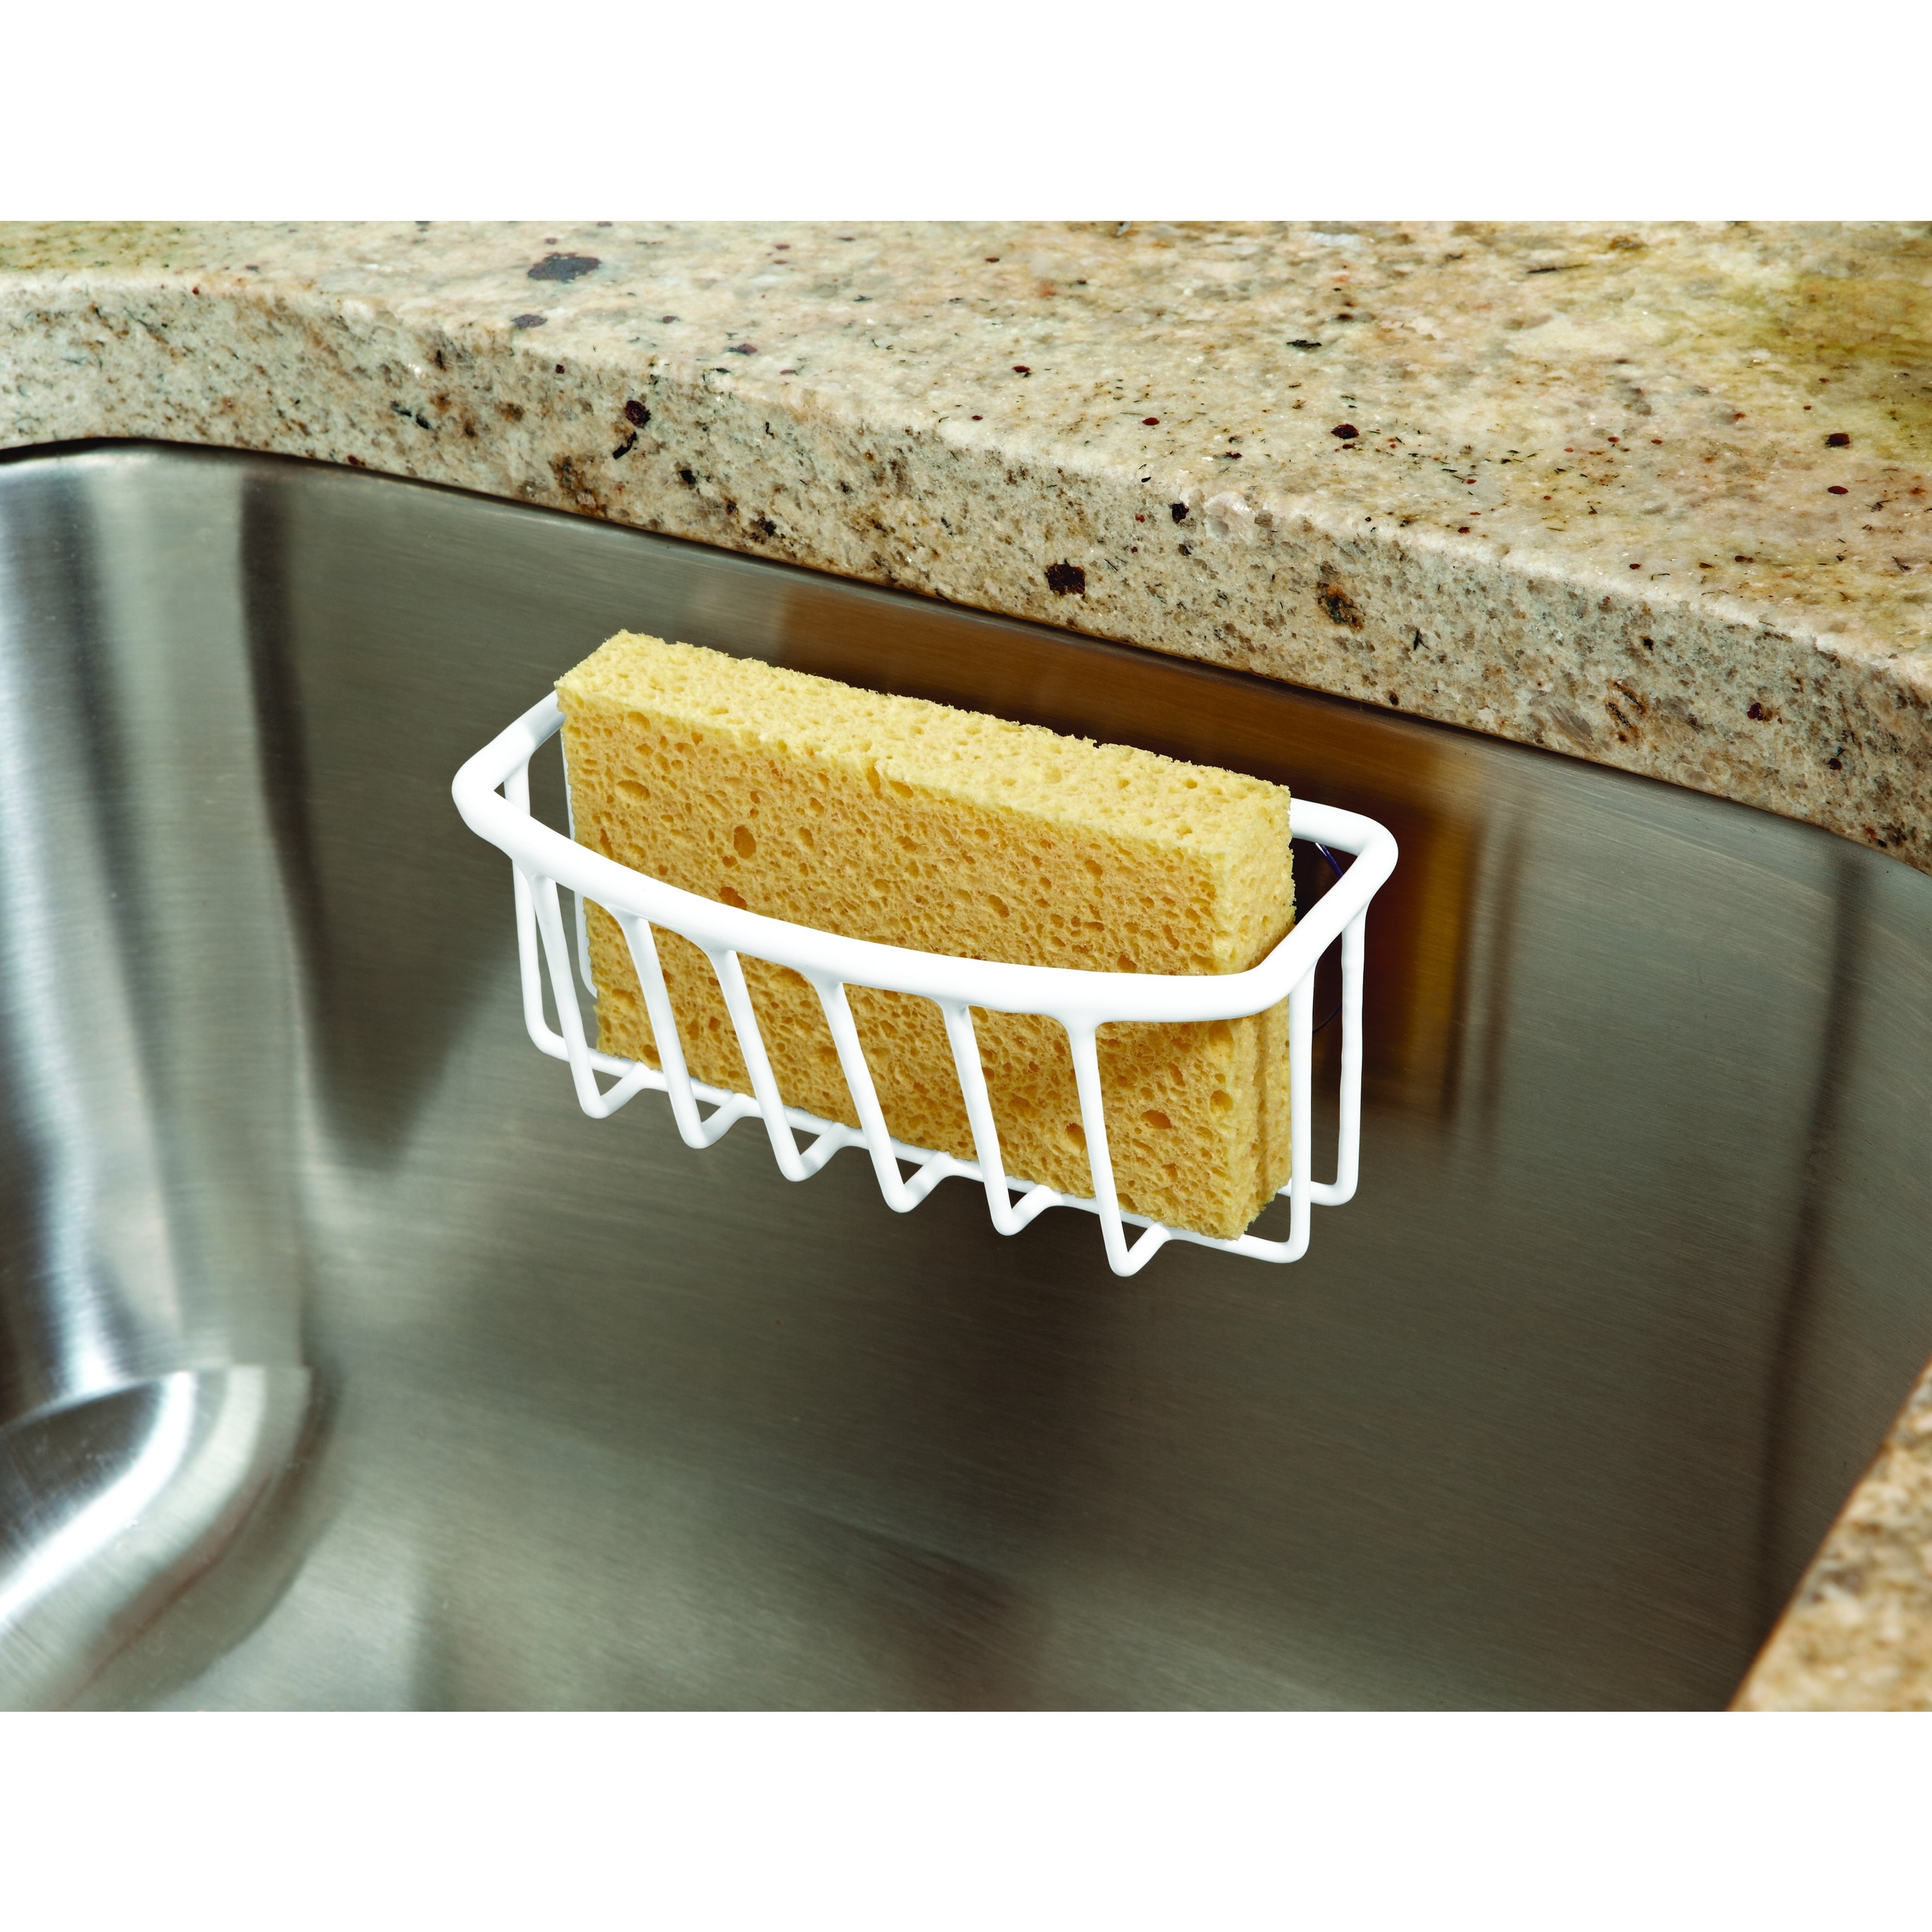 Handy Home Concepts Kitchen Sink Caddy Sponge Soap Holder for Countertop  Large Kitchen Soap Tray Sink Organizer